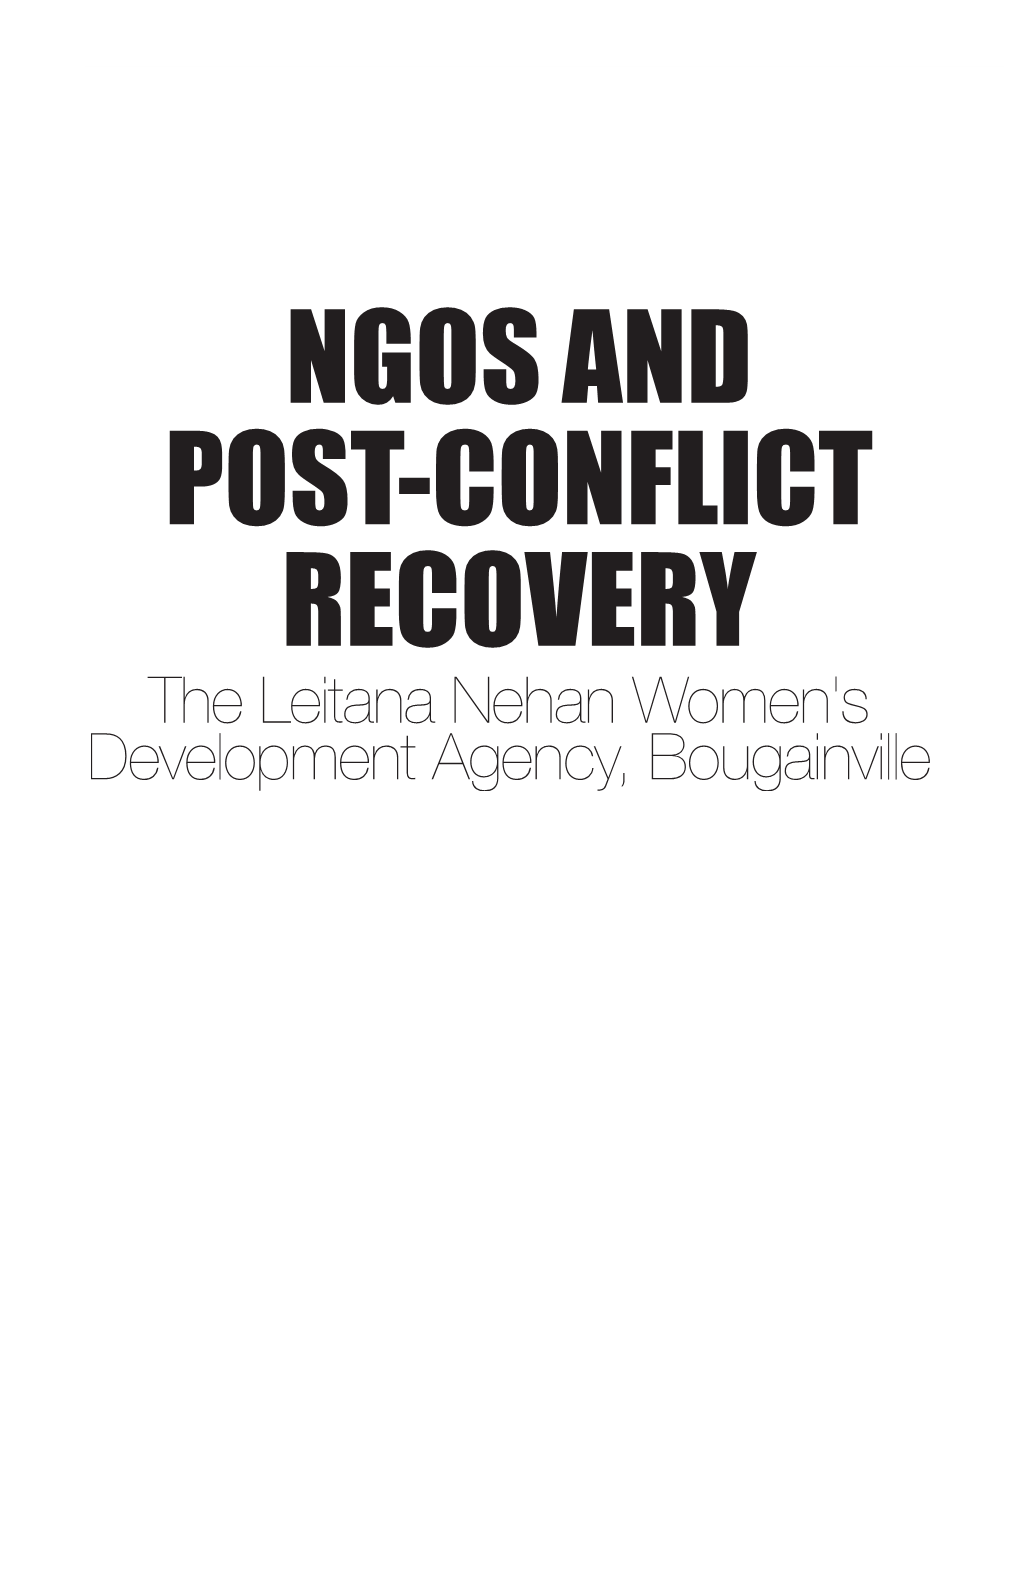 Ngos and Post-Conflict Recovery: the Leitana Nehan Women's